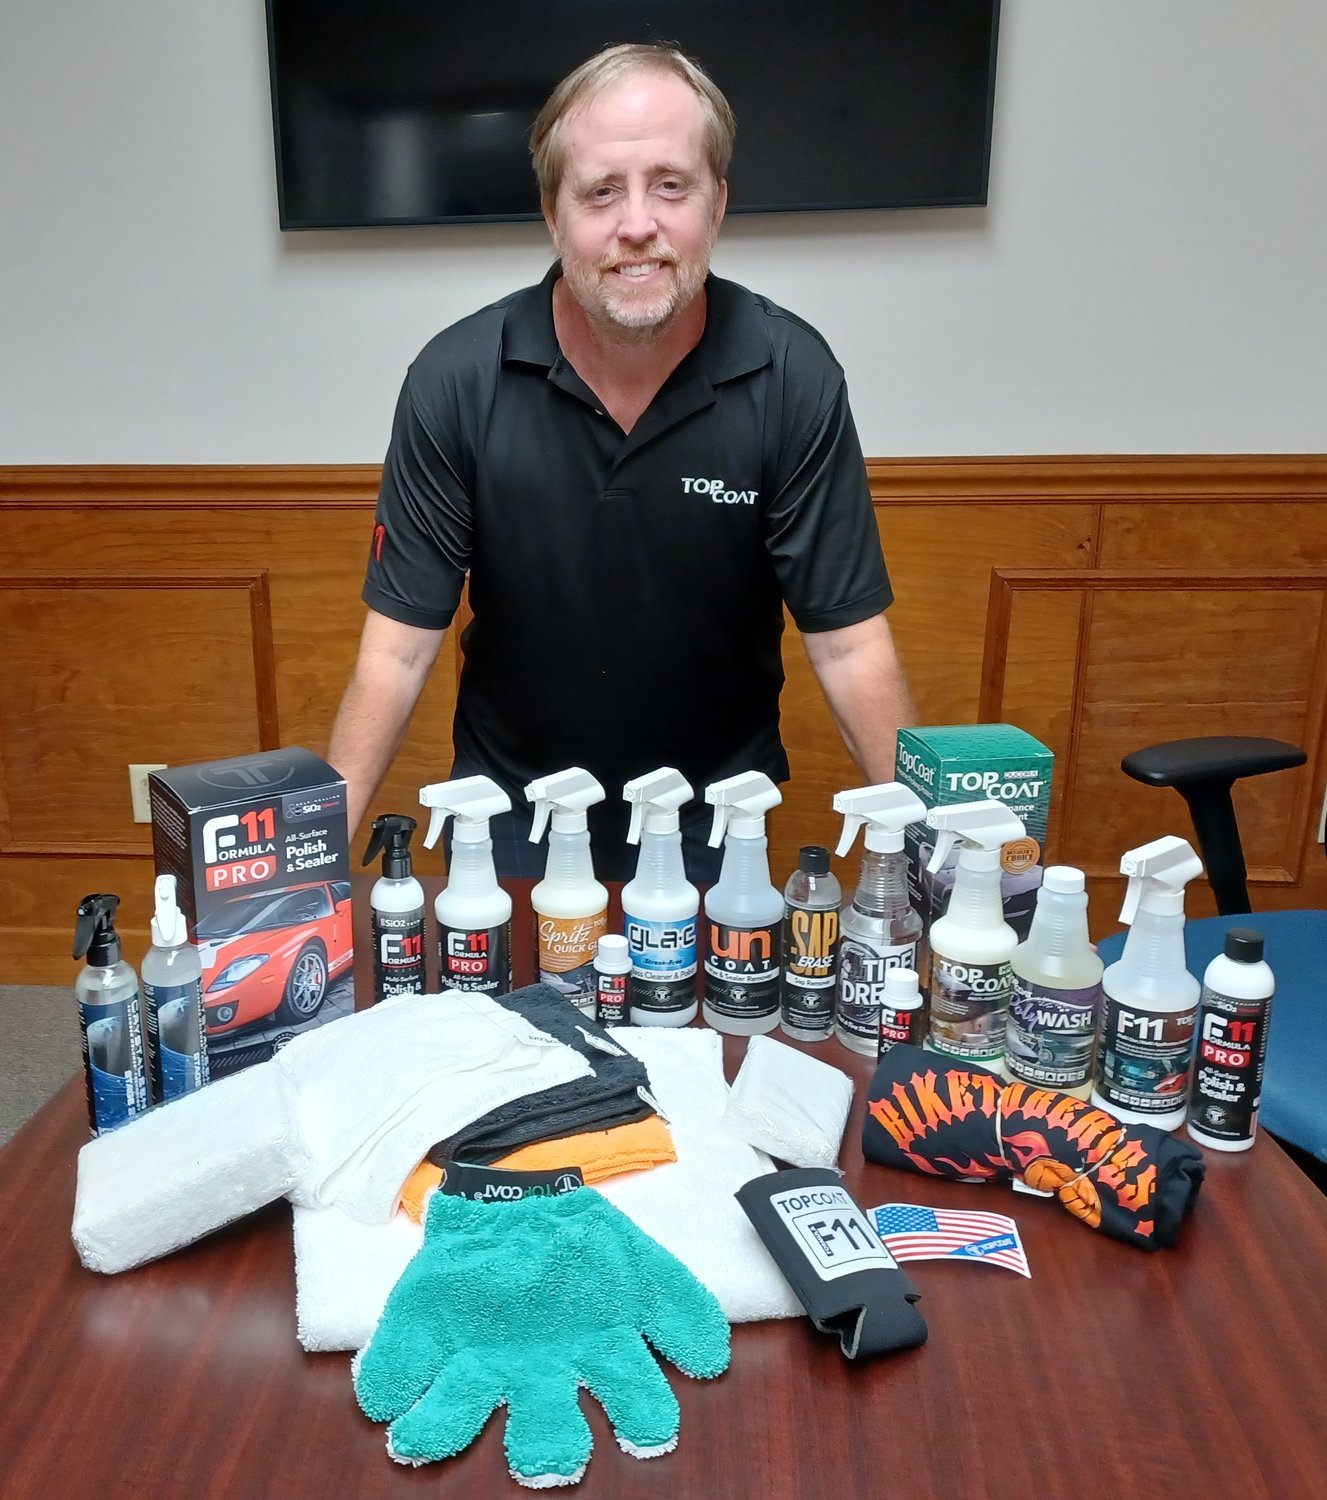 TopCoat Products founder Scott Smith shows off his company’s many products.